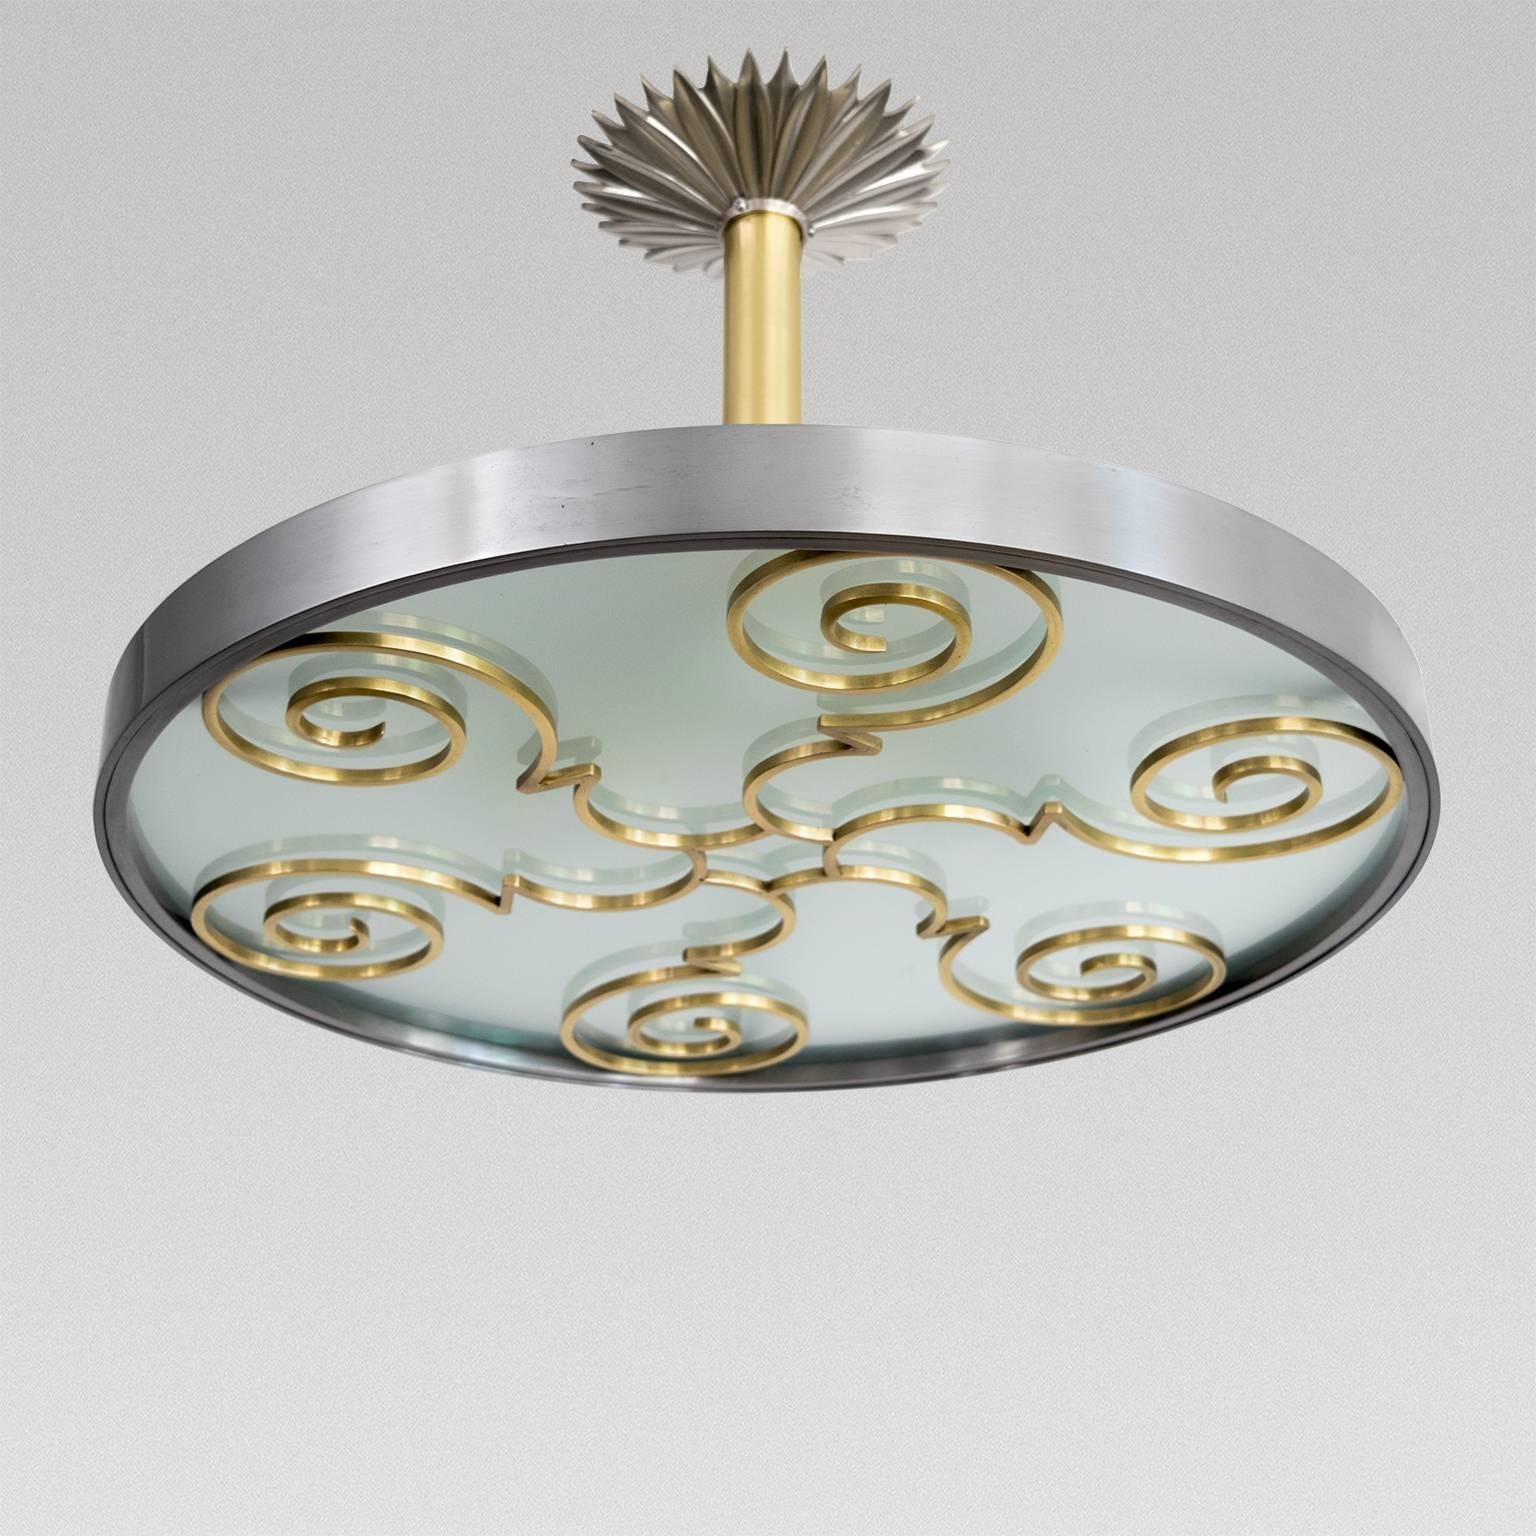 Scandinavian Modern steel, brass and glass pendant fixture designed by Lars Holmström (with impressed mark). The fixture's polished steel frame holds a brass grille with 6 spirals below an acid etched original glass diffuser. Three painted iron